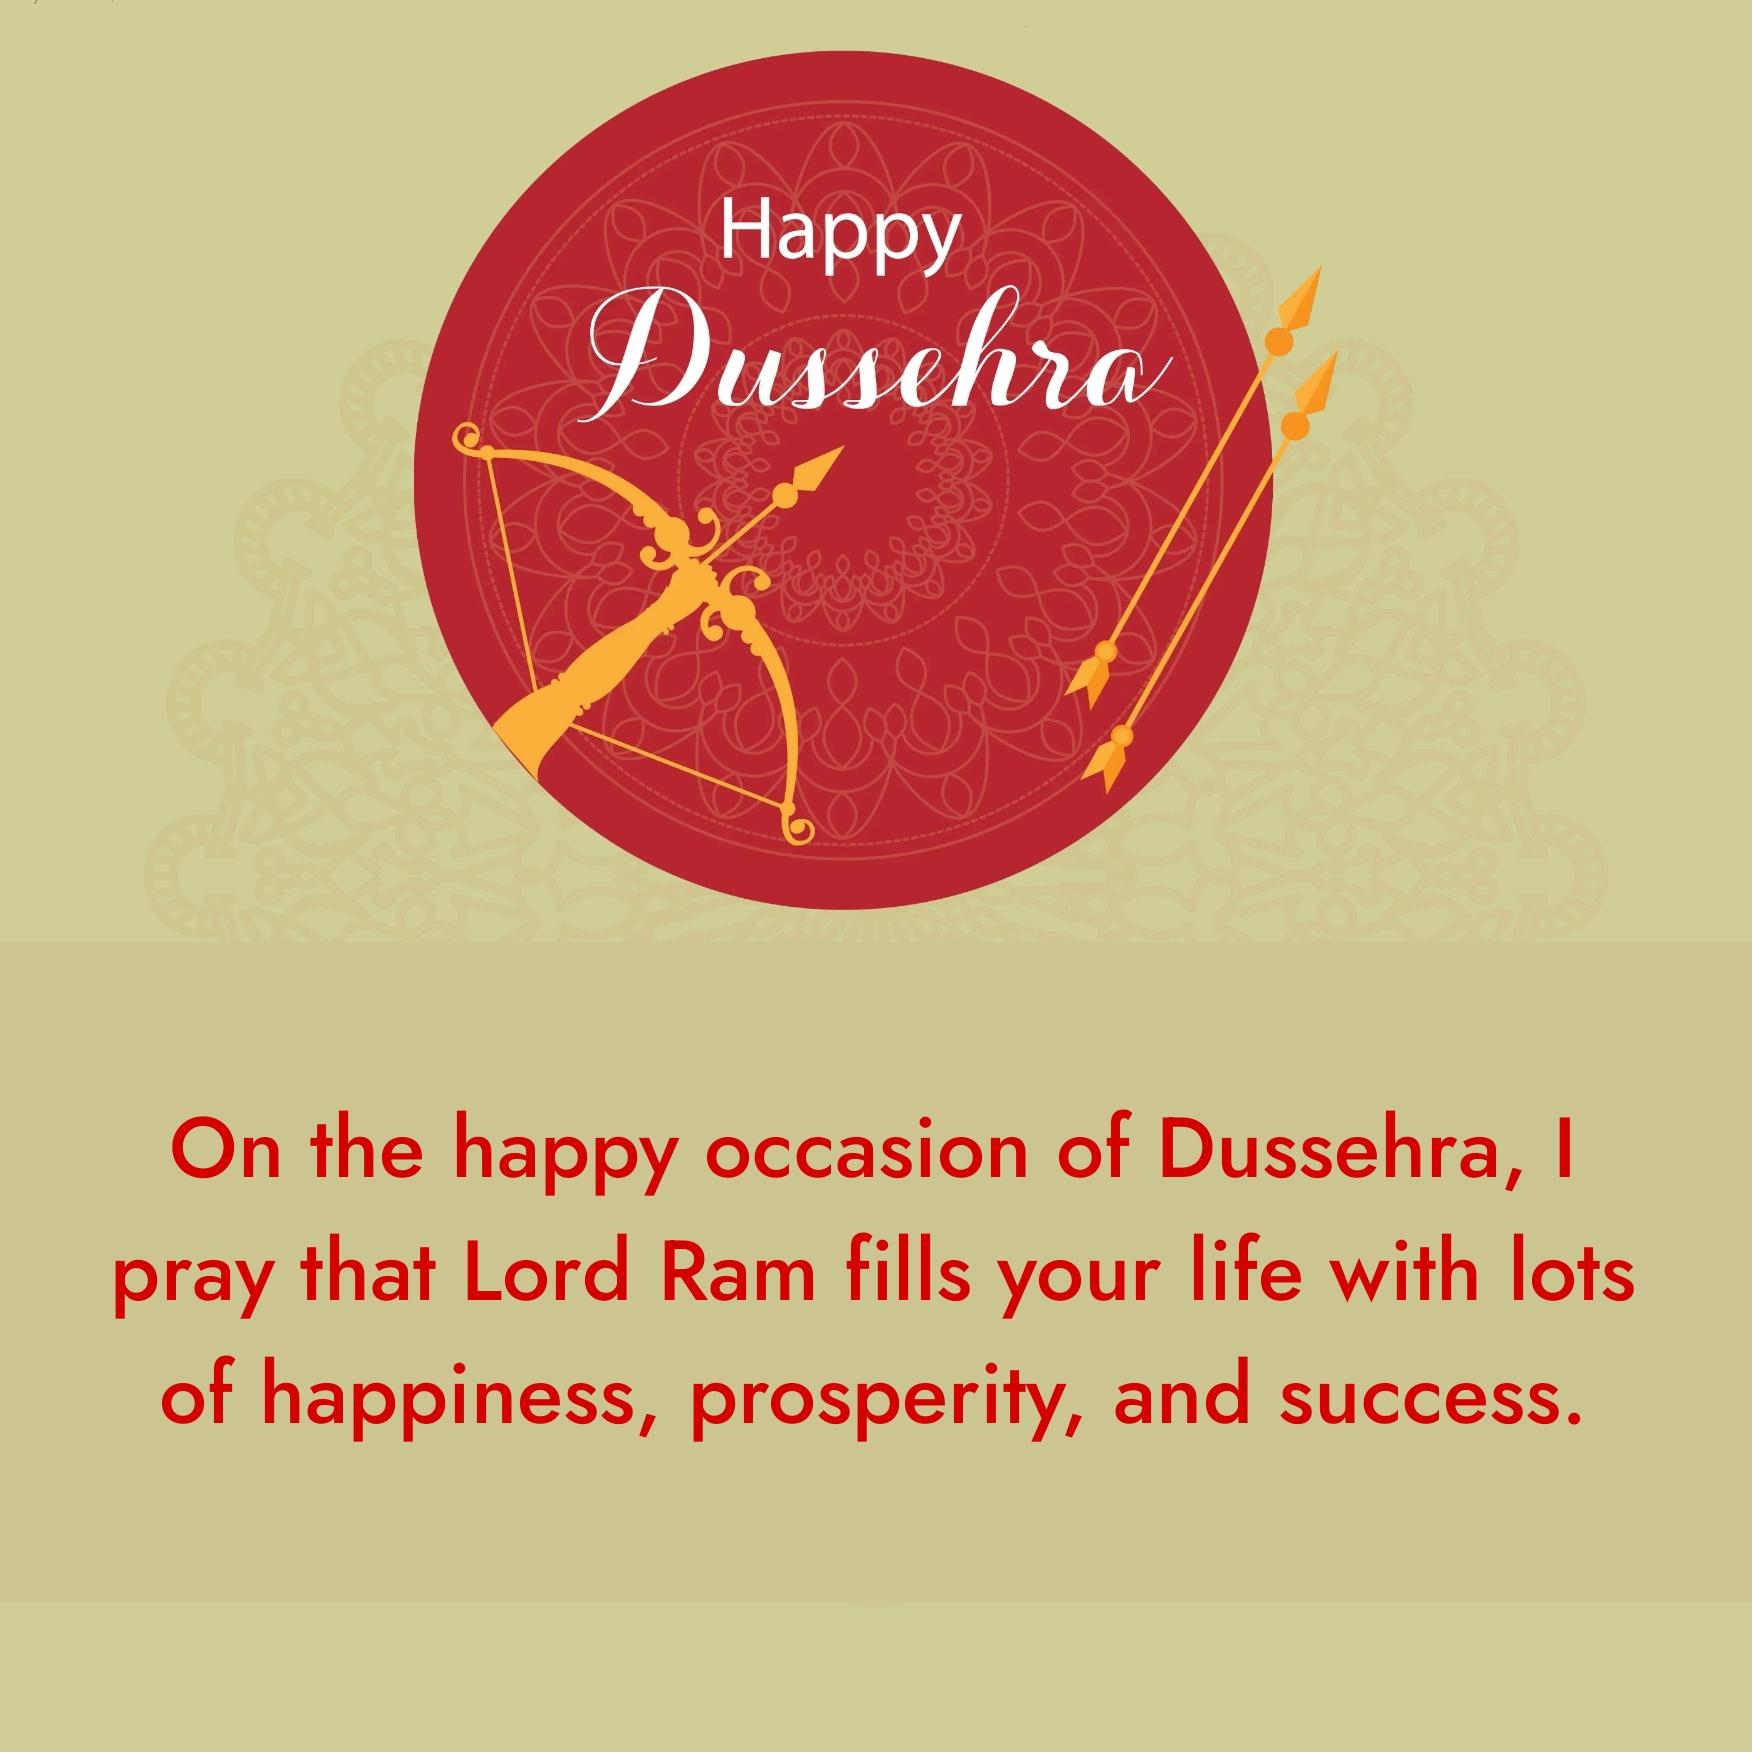 On the happy occasion of Dussehra I pray